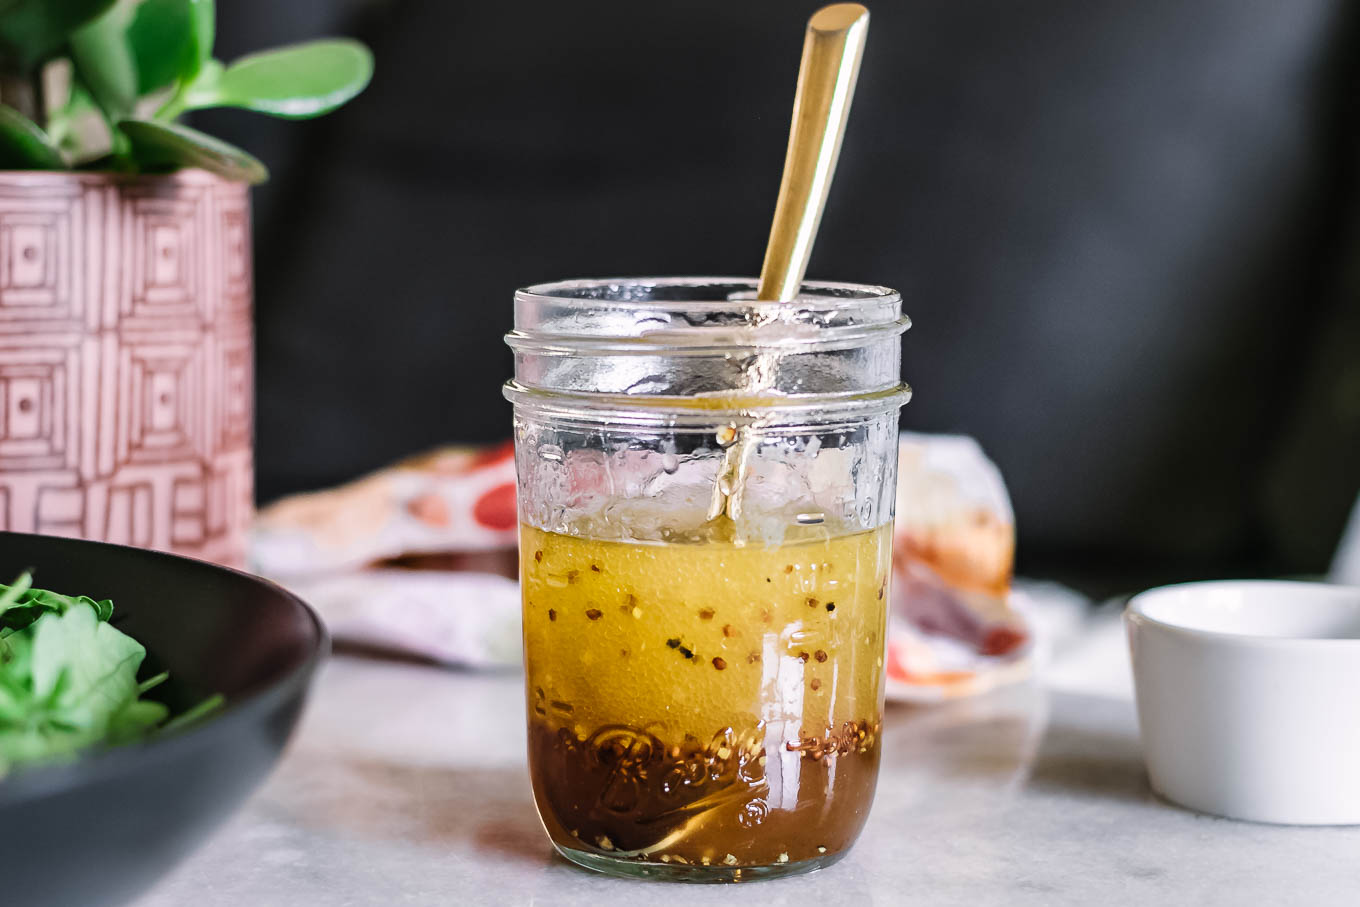 maple vinaigrette in a glass jar with a gold spoon